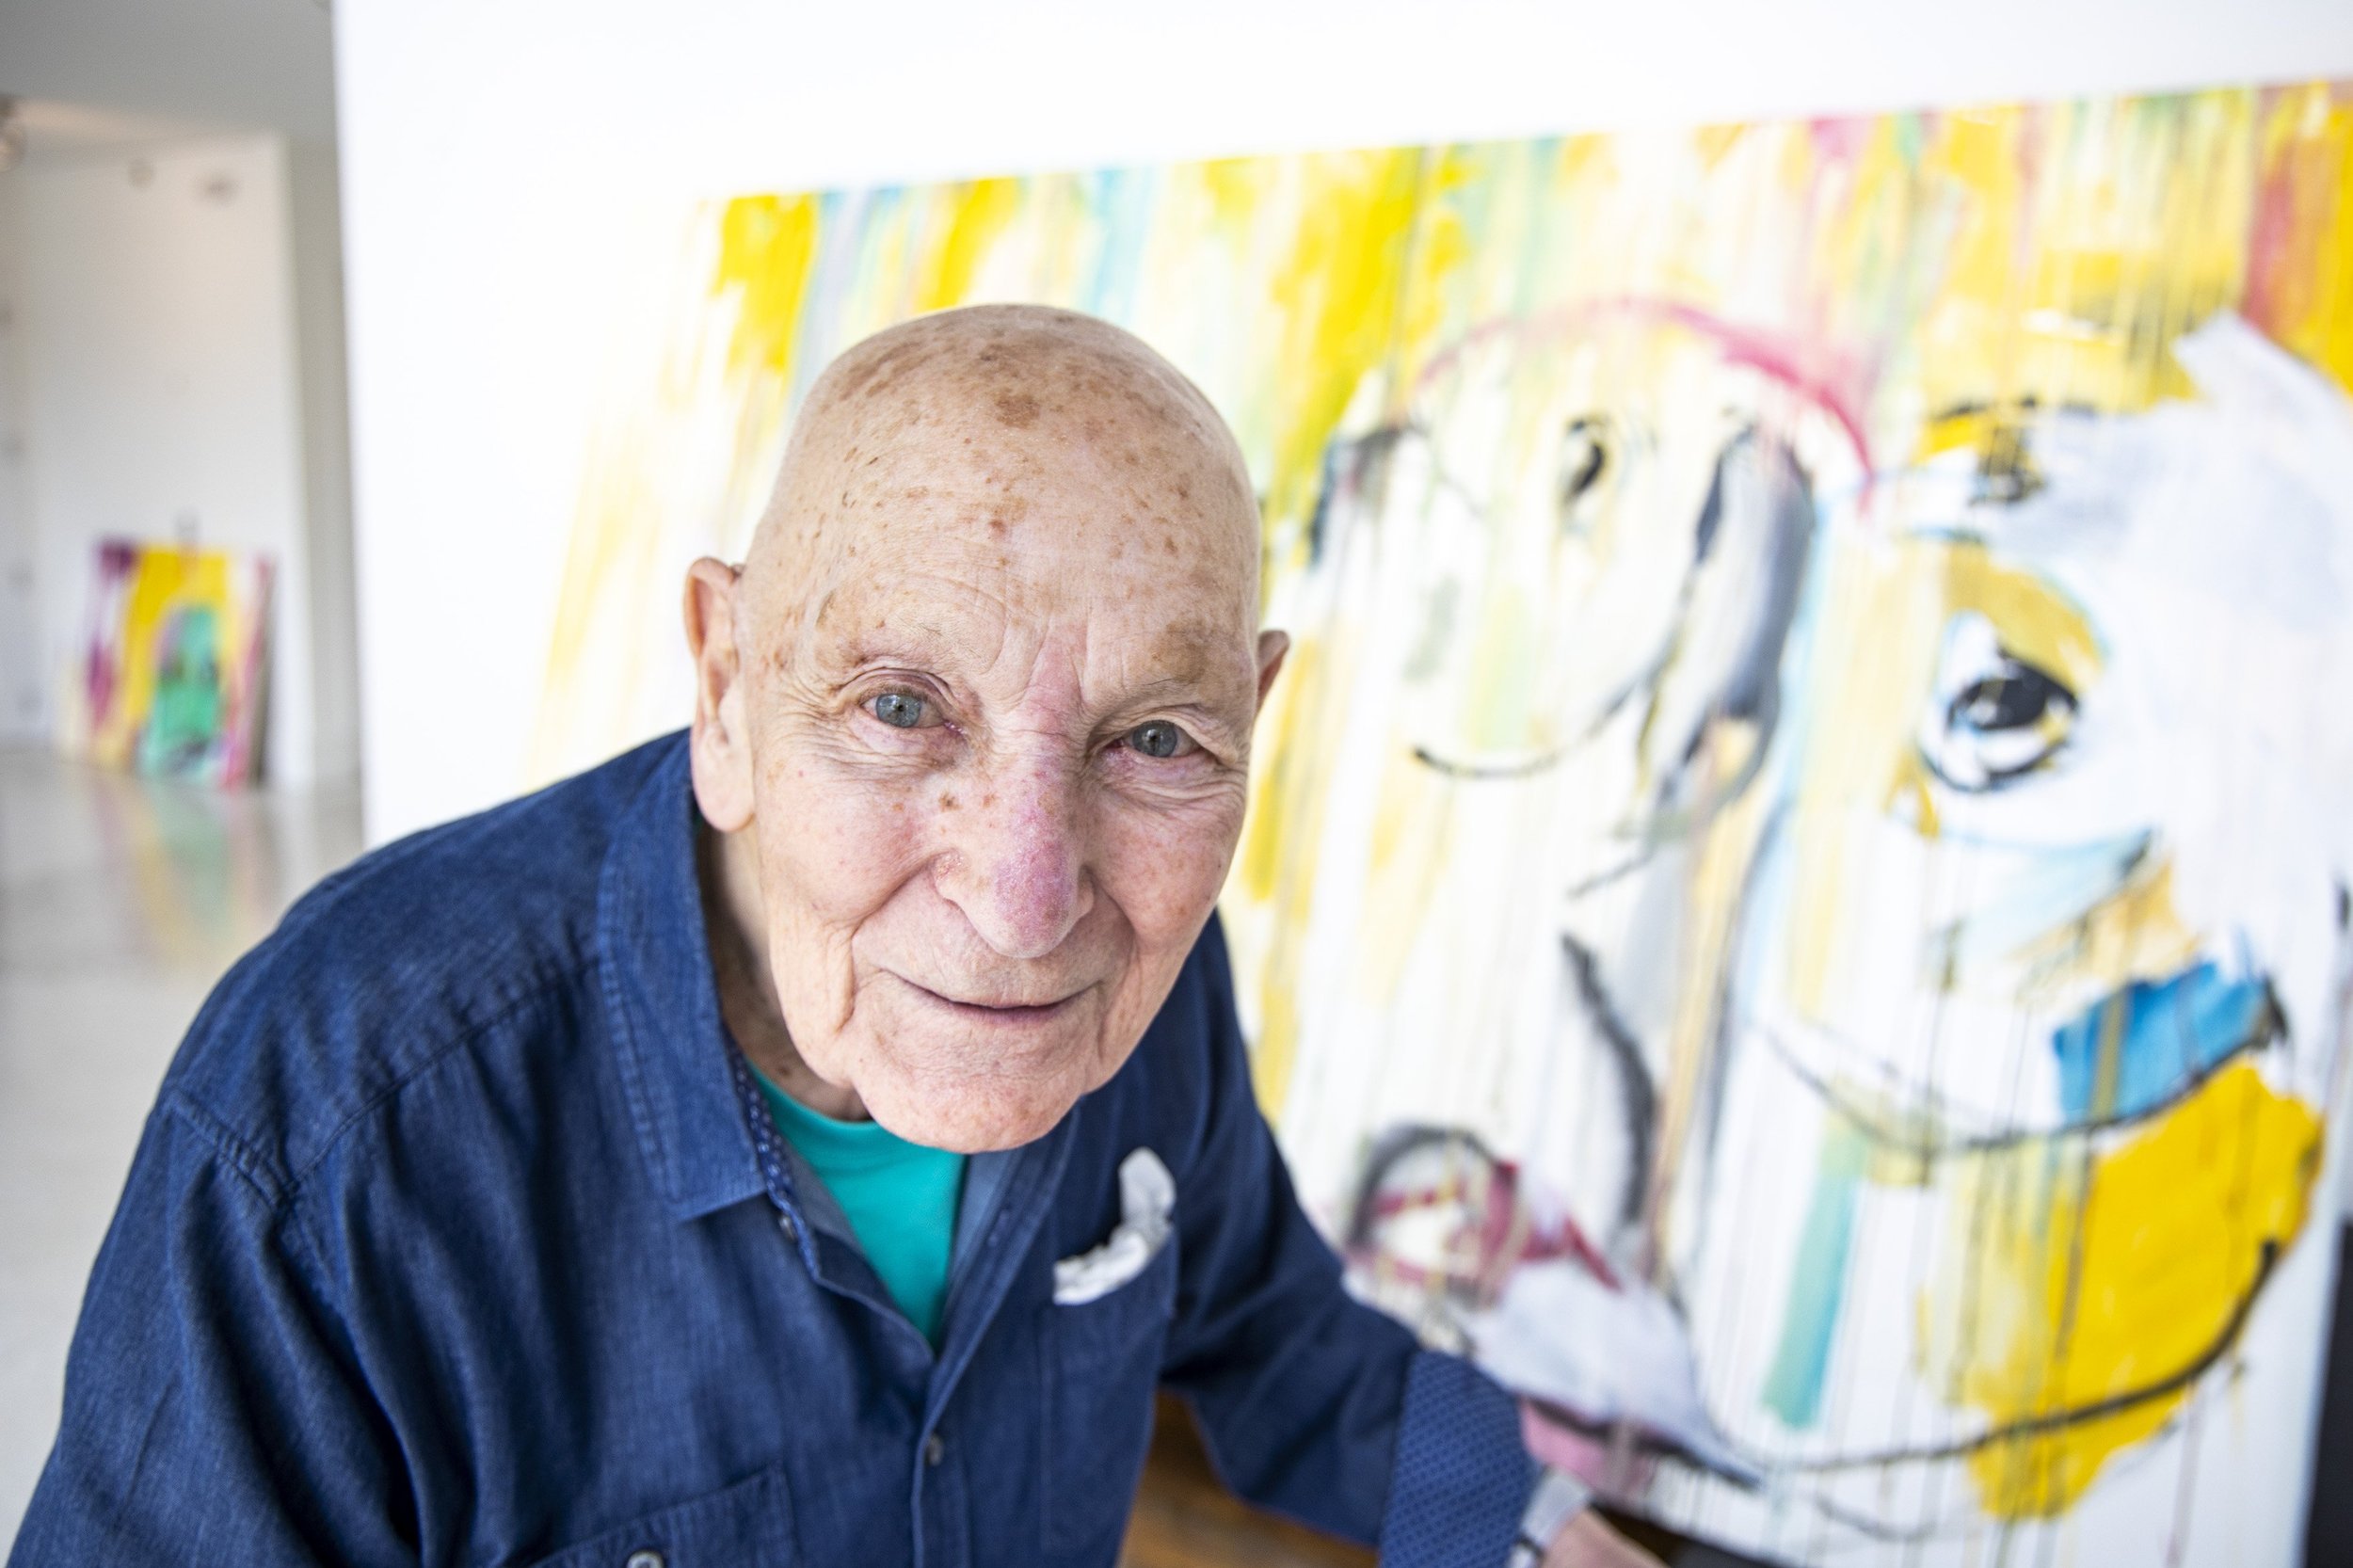  Harold Garde, 98, stands in front of one of his paintings in a new exhibit titled “They Art Us” at the Mills Gallery in Orlando on Monday, Aug. 2, 2021. 